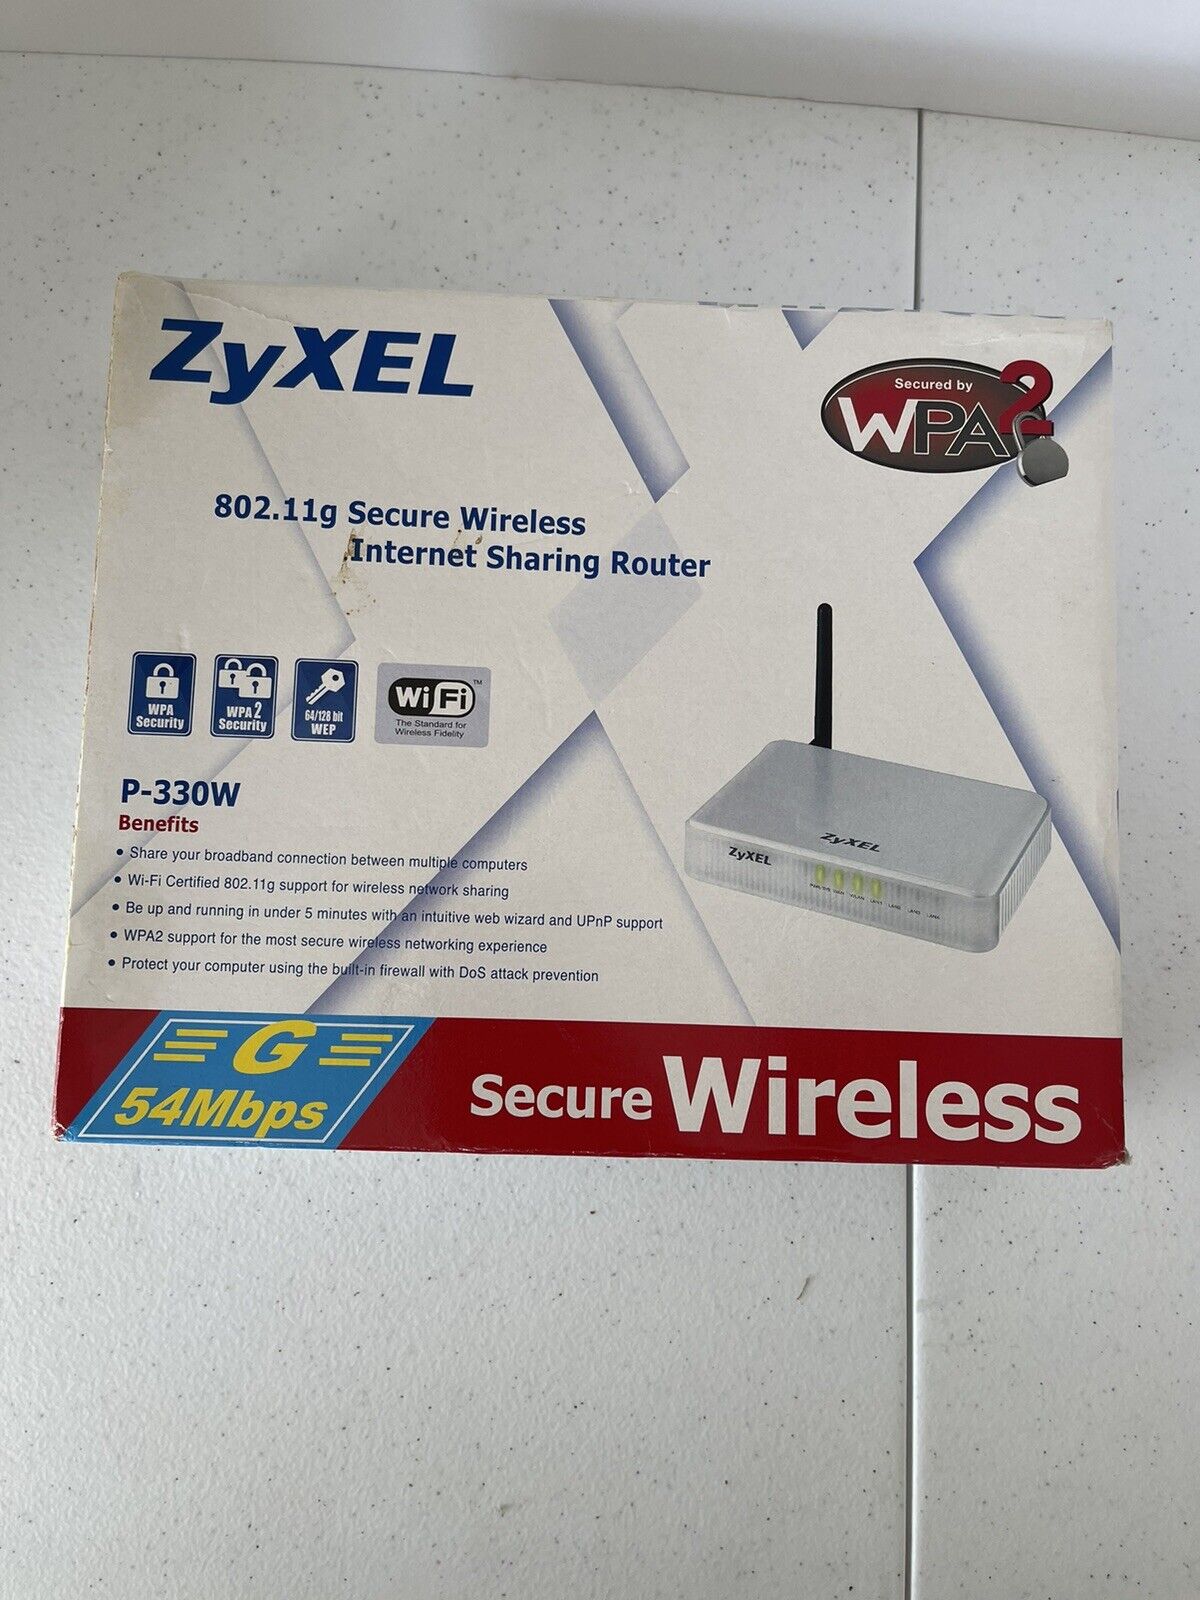 Zyxel Secure Wireless Internet Sharing Router P-330W G 54MBPS